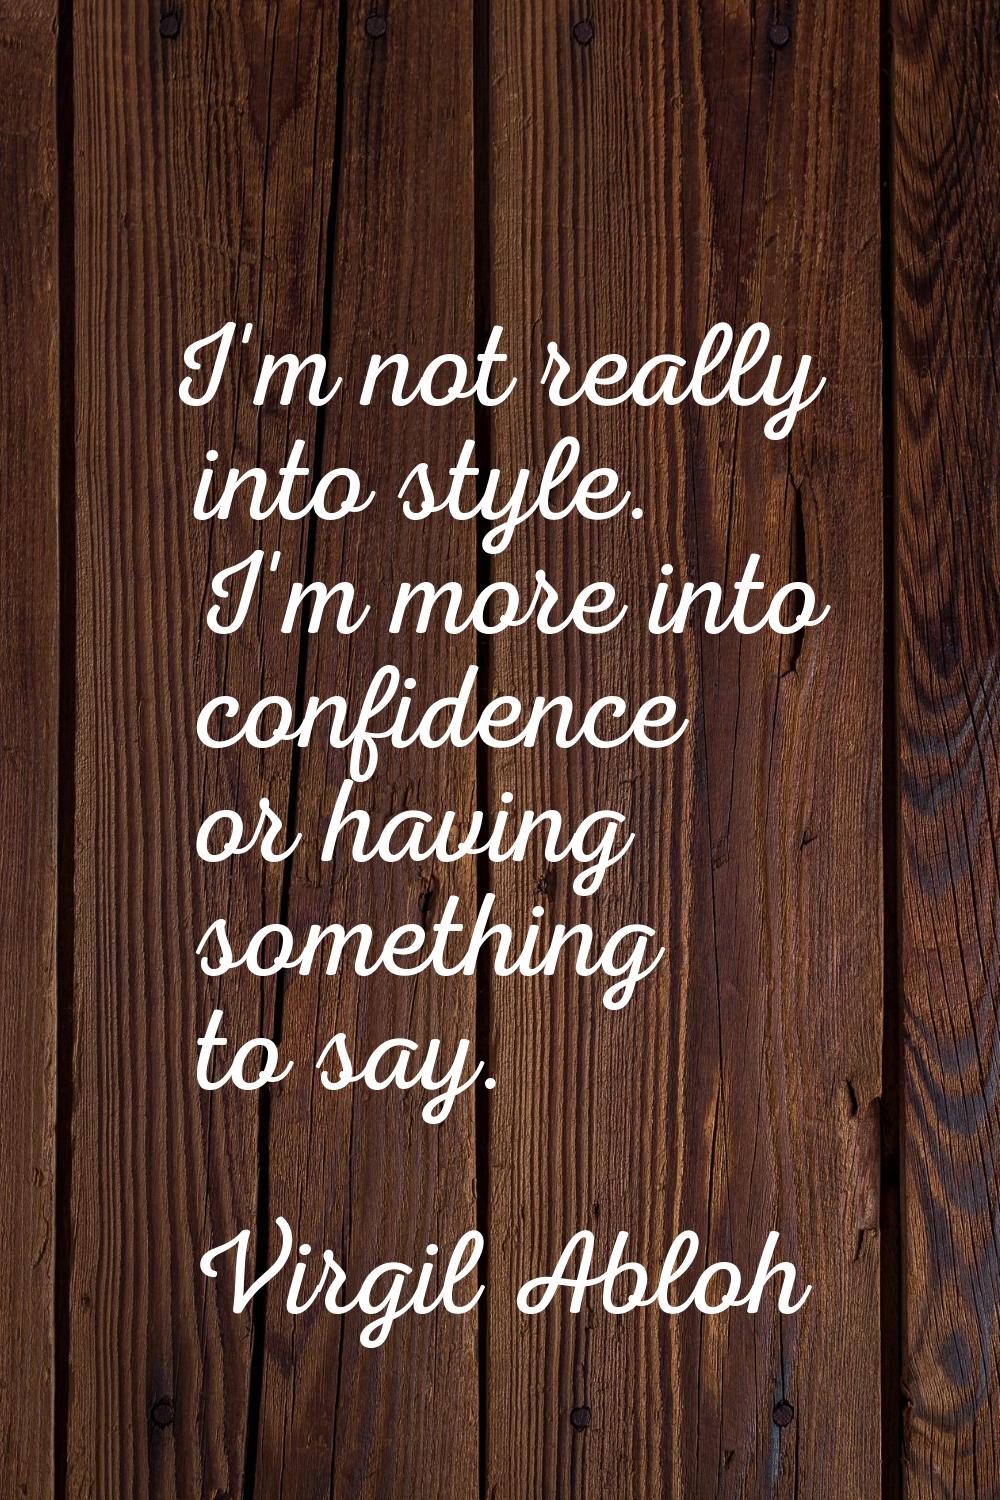 I'm not really into style. I'm more into confidence or having something to say.